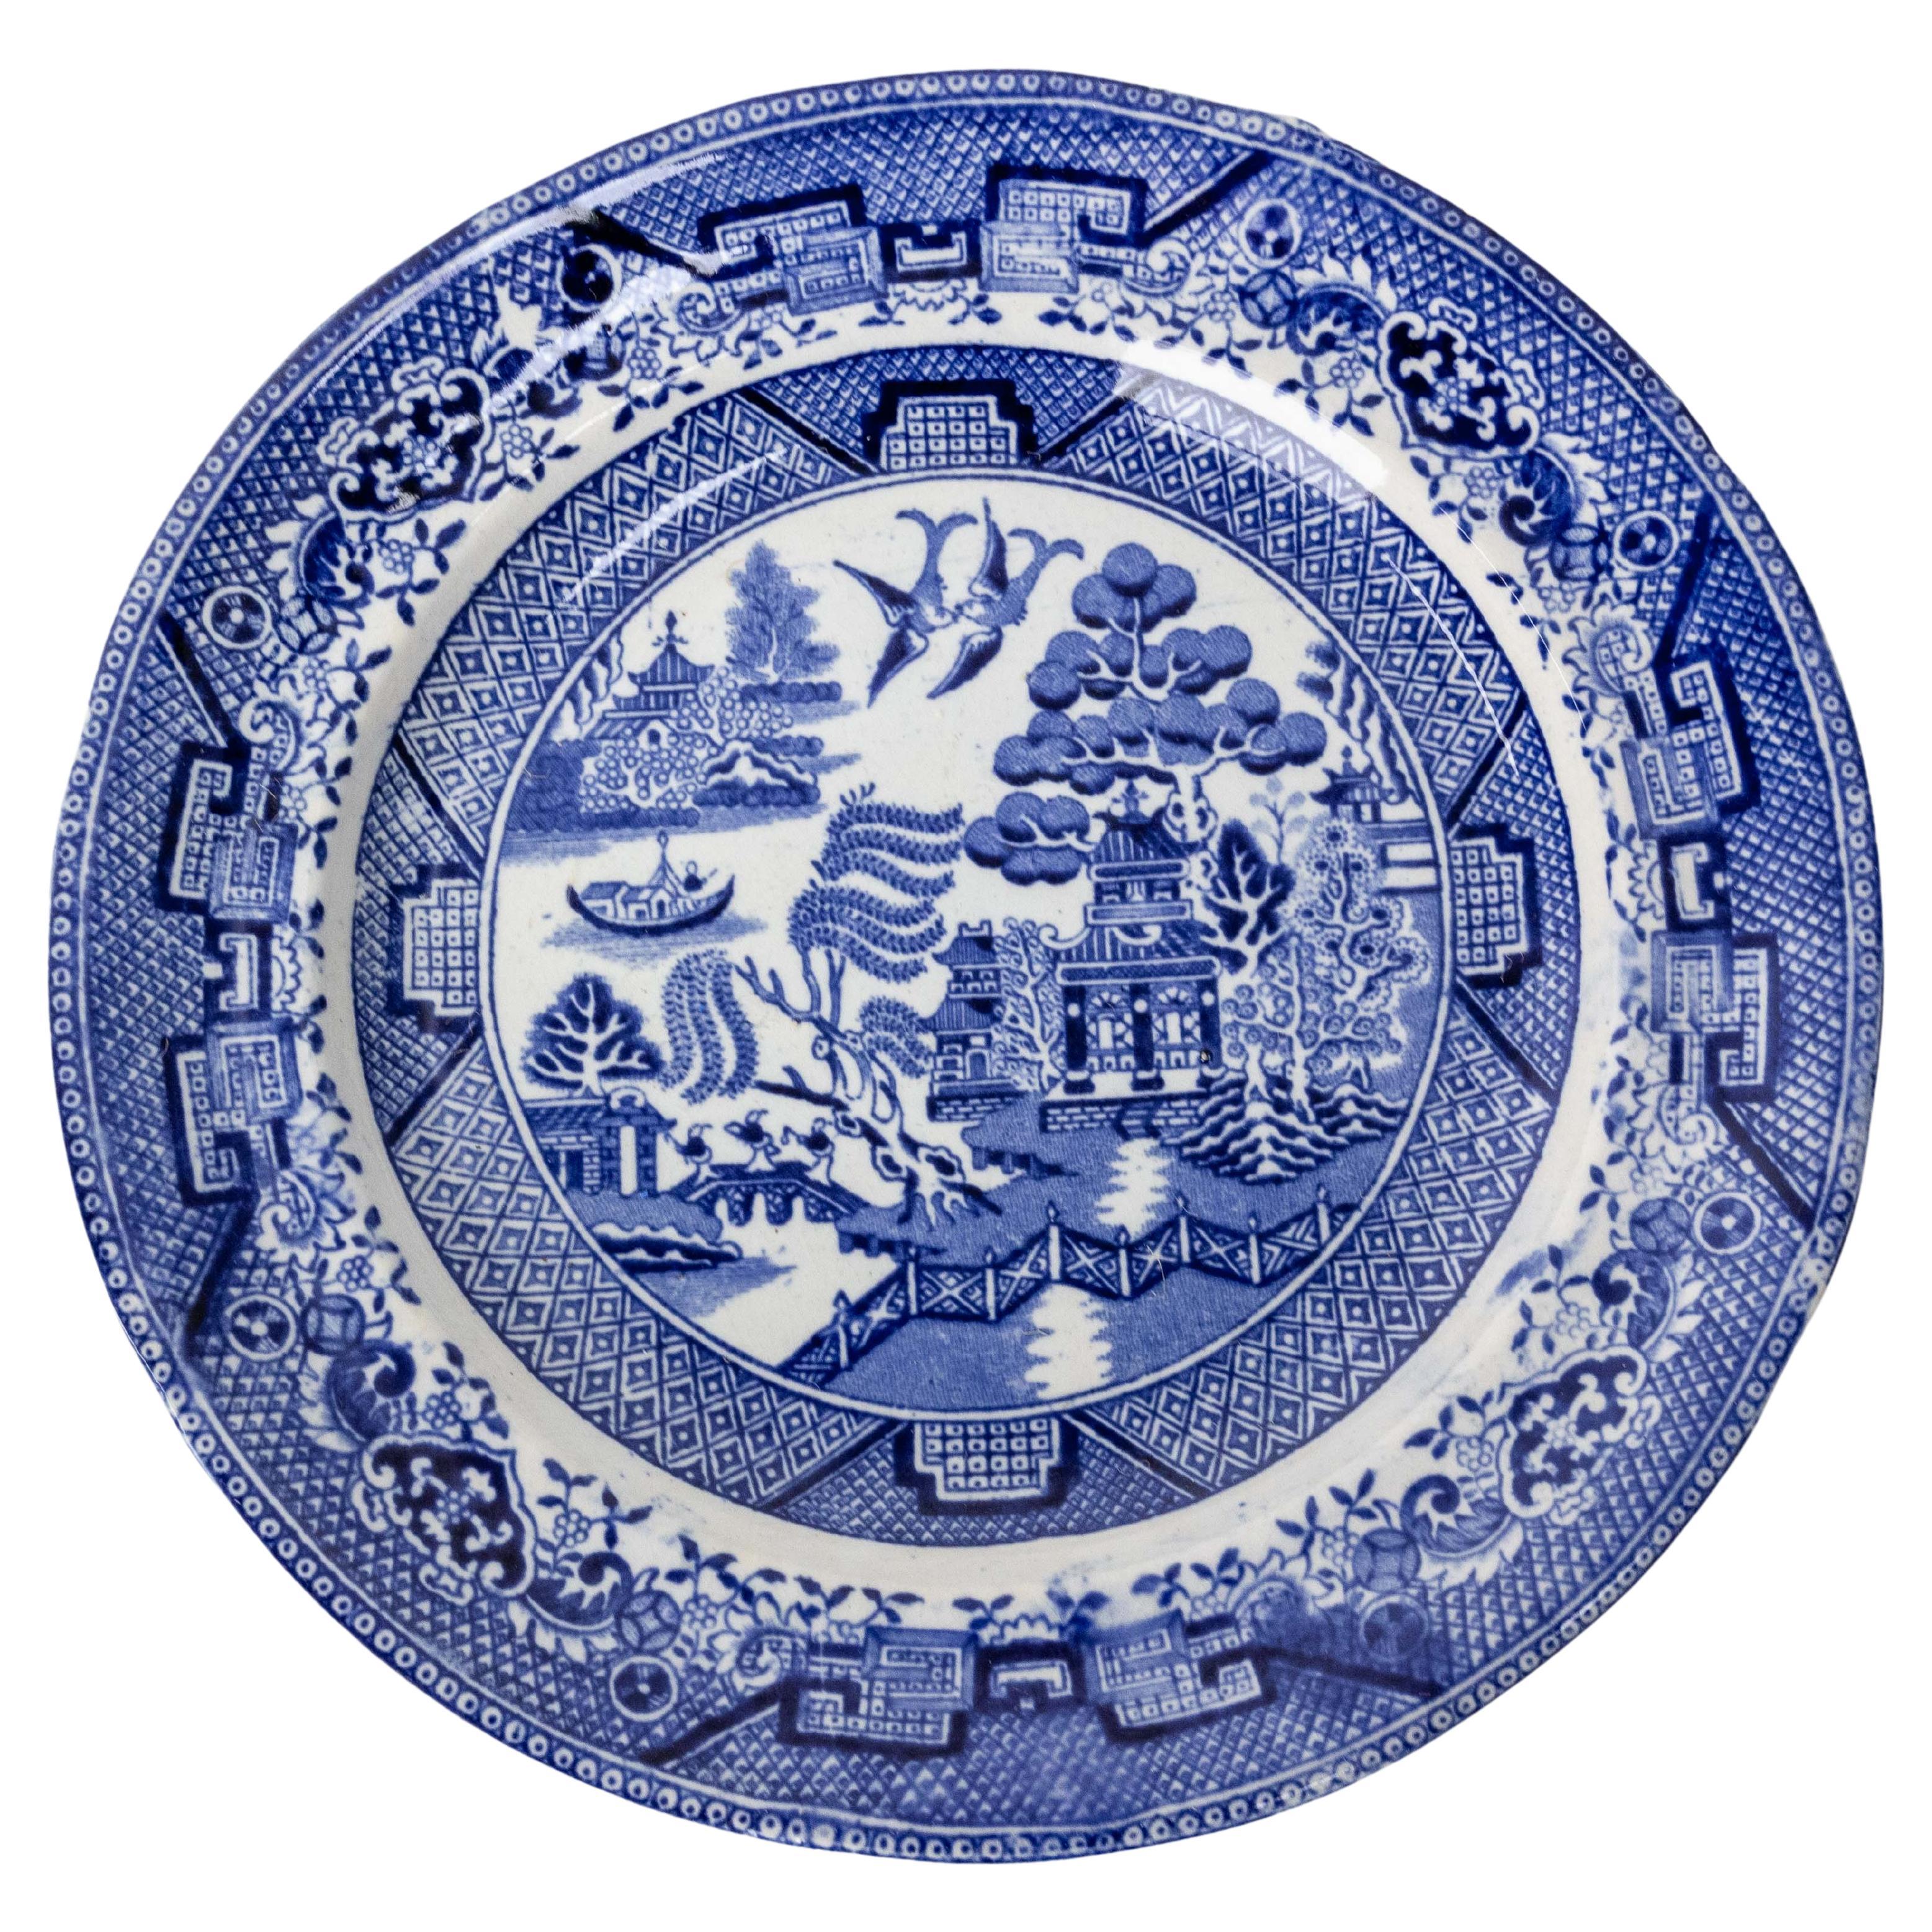 Set of Twelve Faience Plates Chinese Style, Staffordshire, 19th Century England